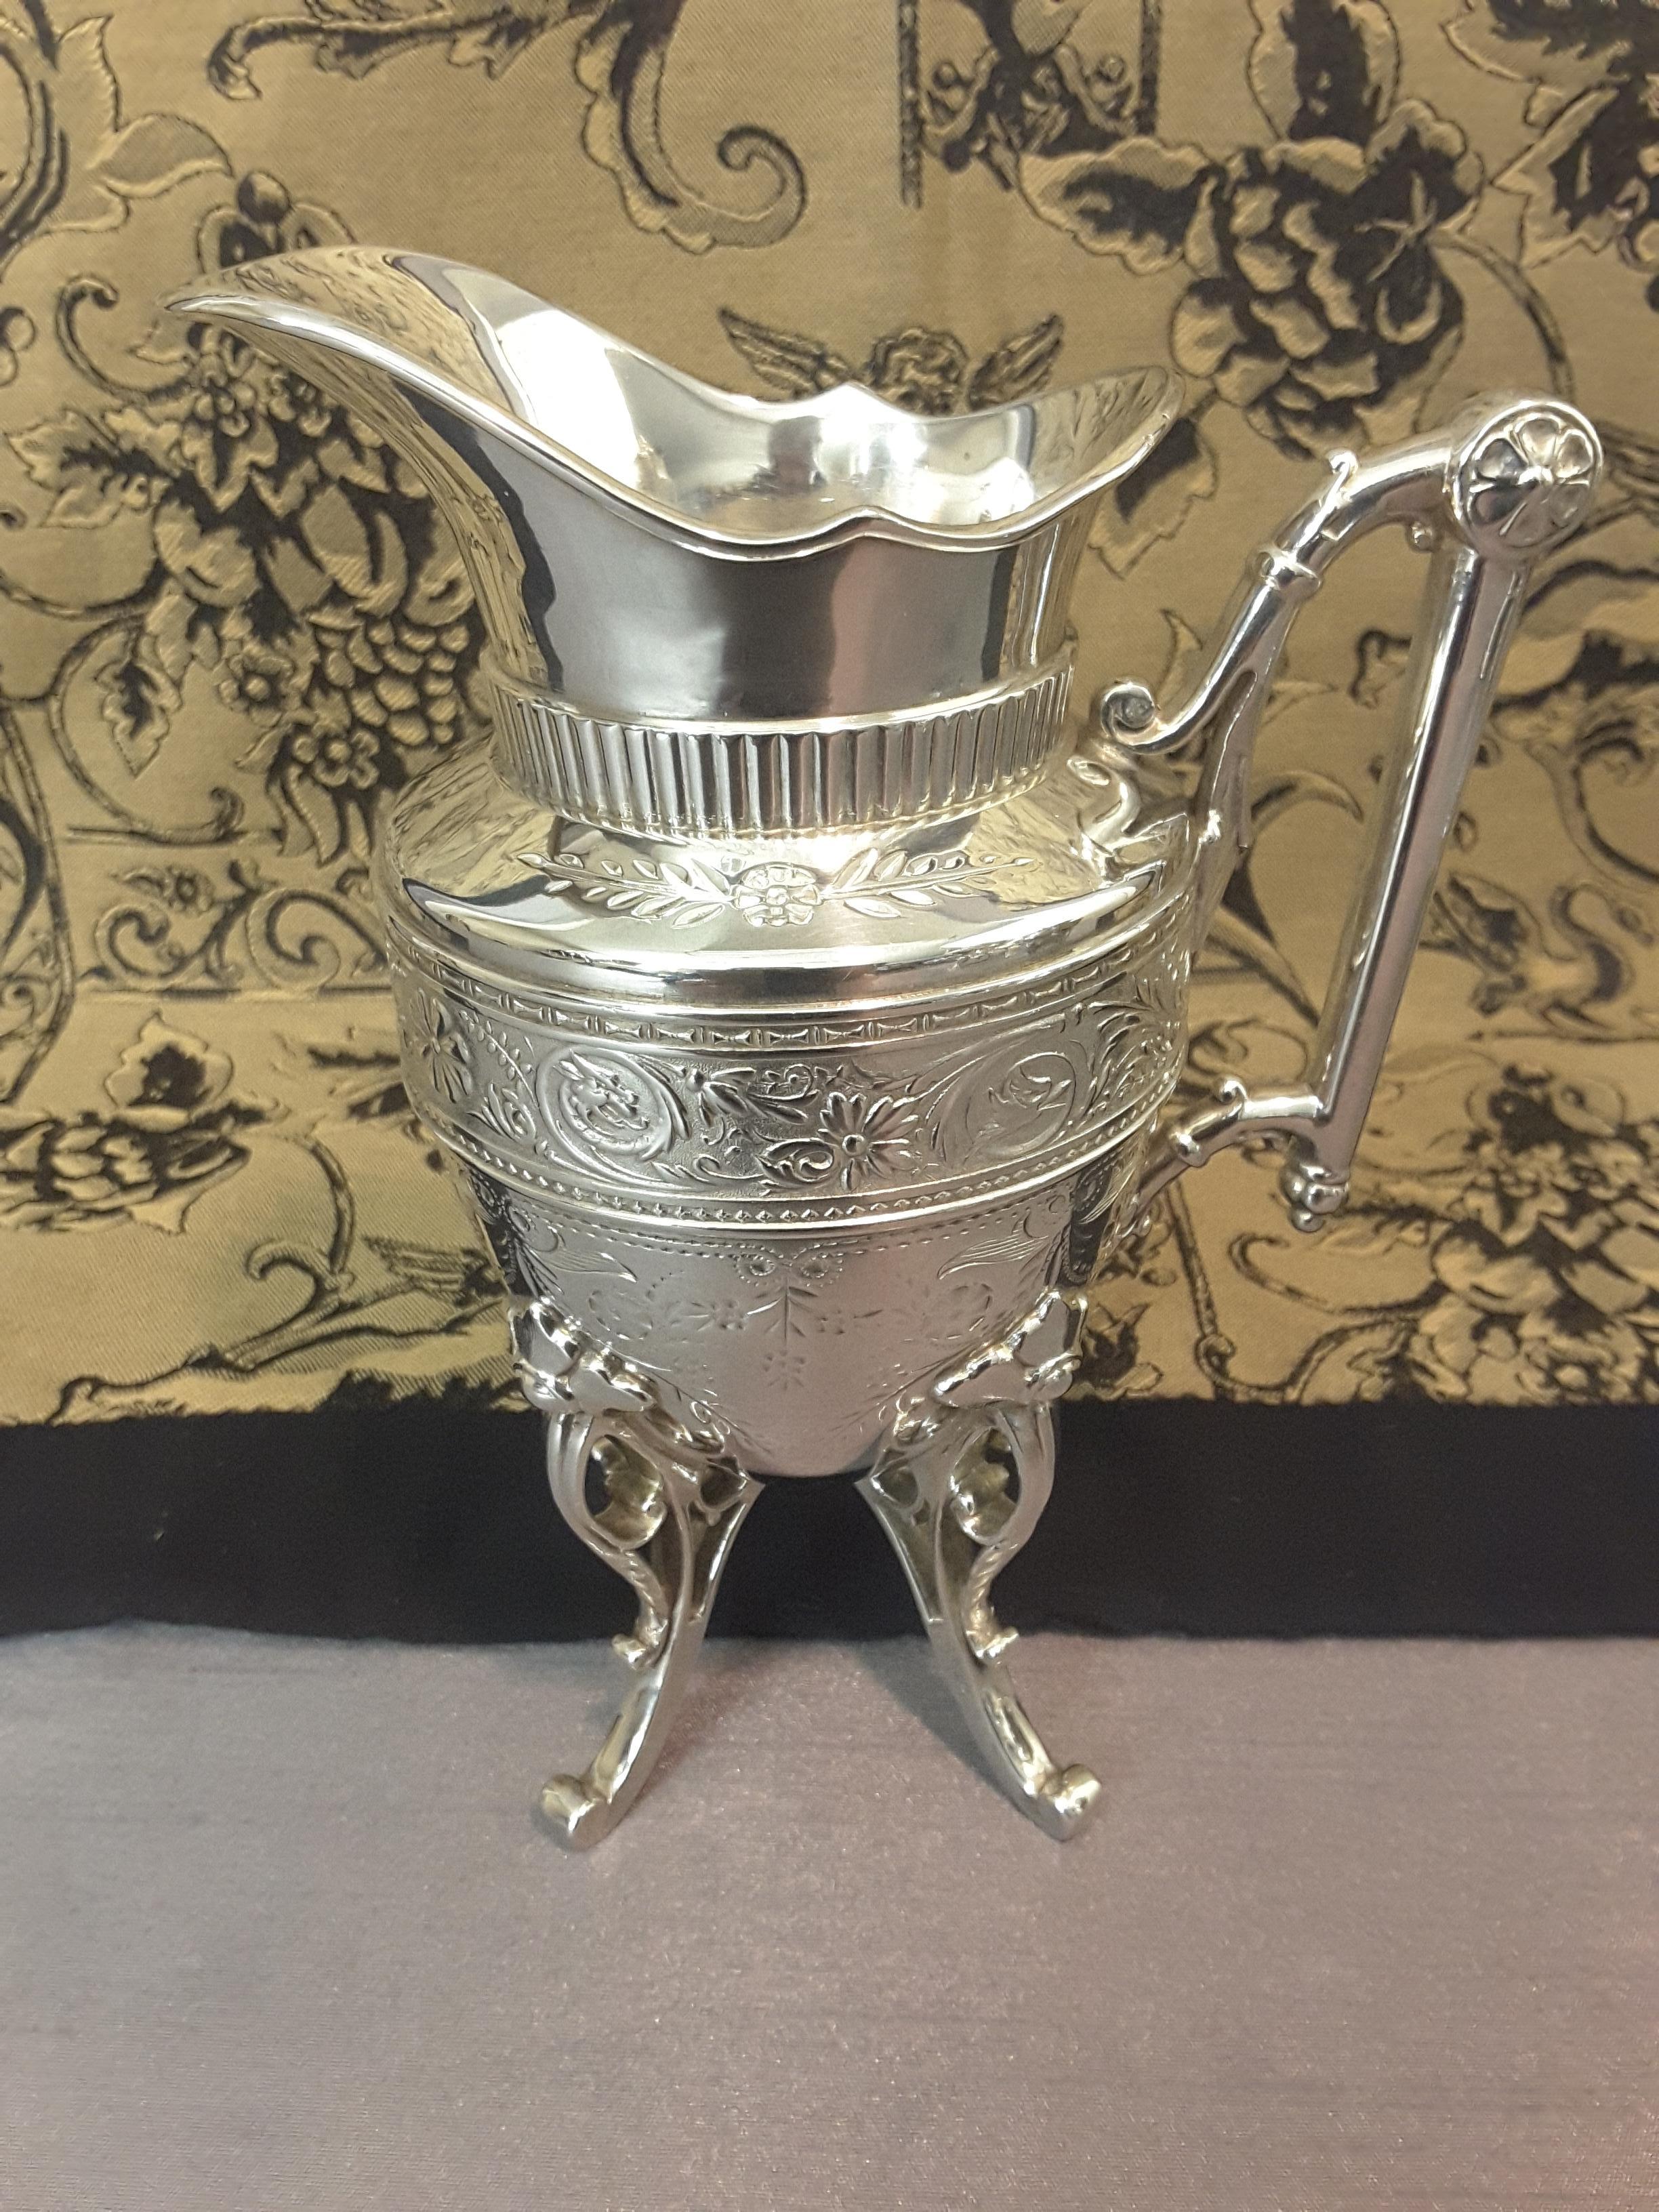 Exquisite Aesthetic Movement Silverplated Tea Service by Simpson, Hall & Miller For Sale 4